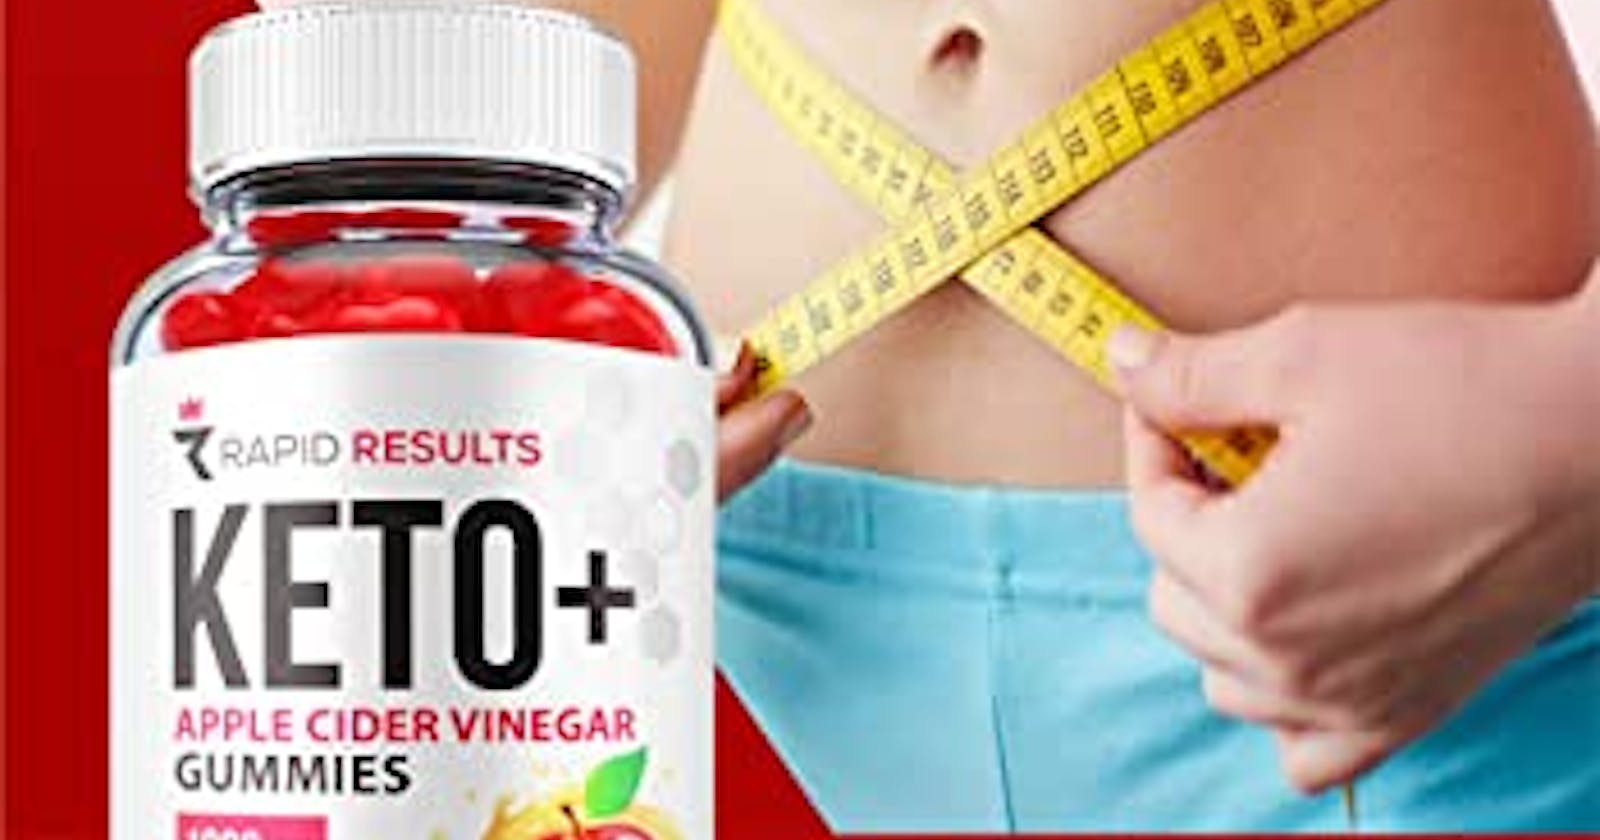 Rapid Results keto ACV Gummies REVIEWS SPAM & LEGIT PRICE GIVEAWAYS OFFERS!